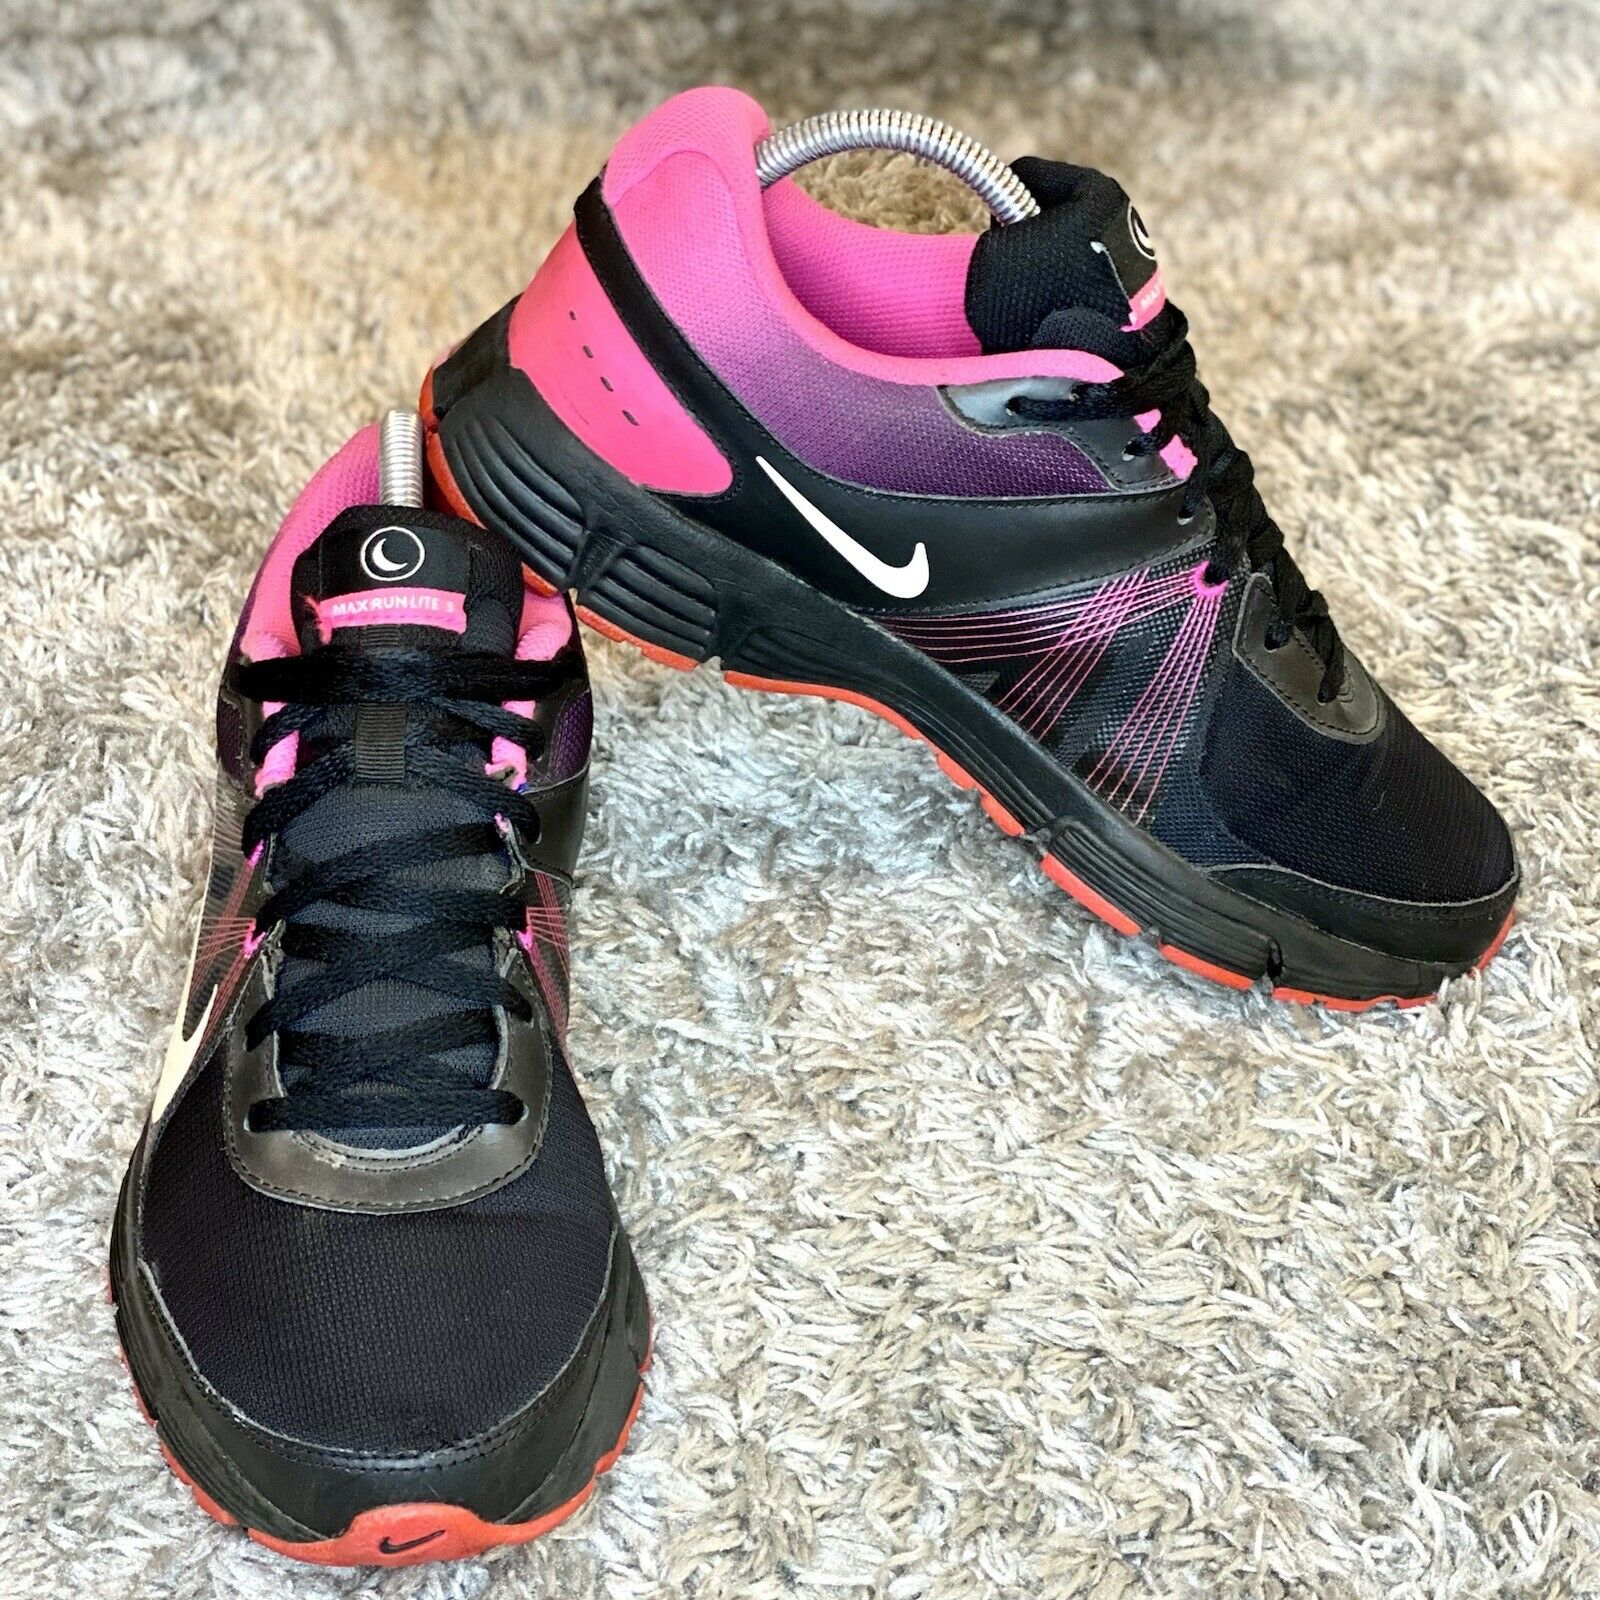 EUC Women's Nike Air Max (Size 9.5) Shoes Sneakers Black Pink 488166-001